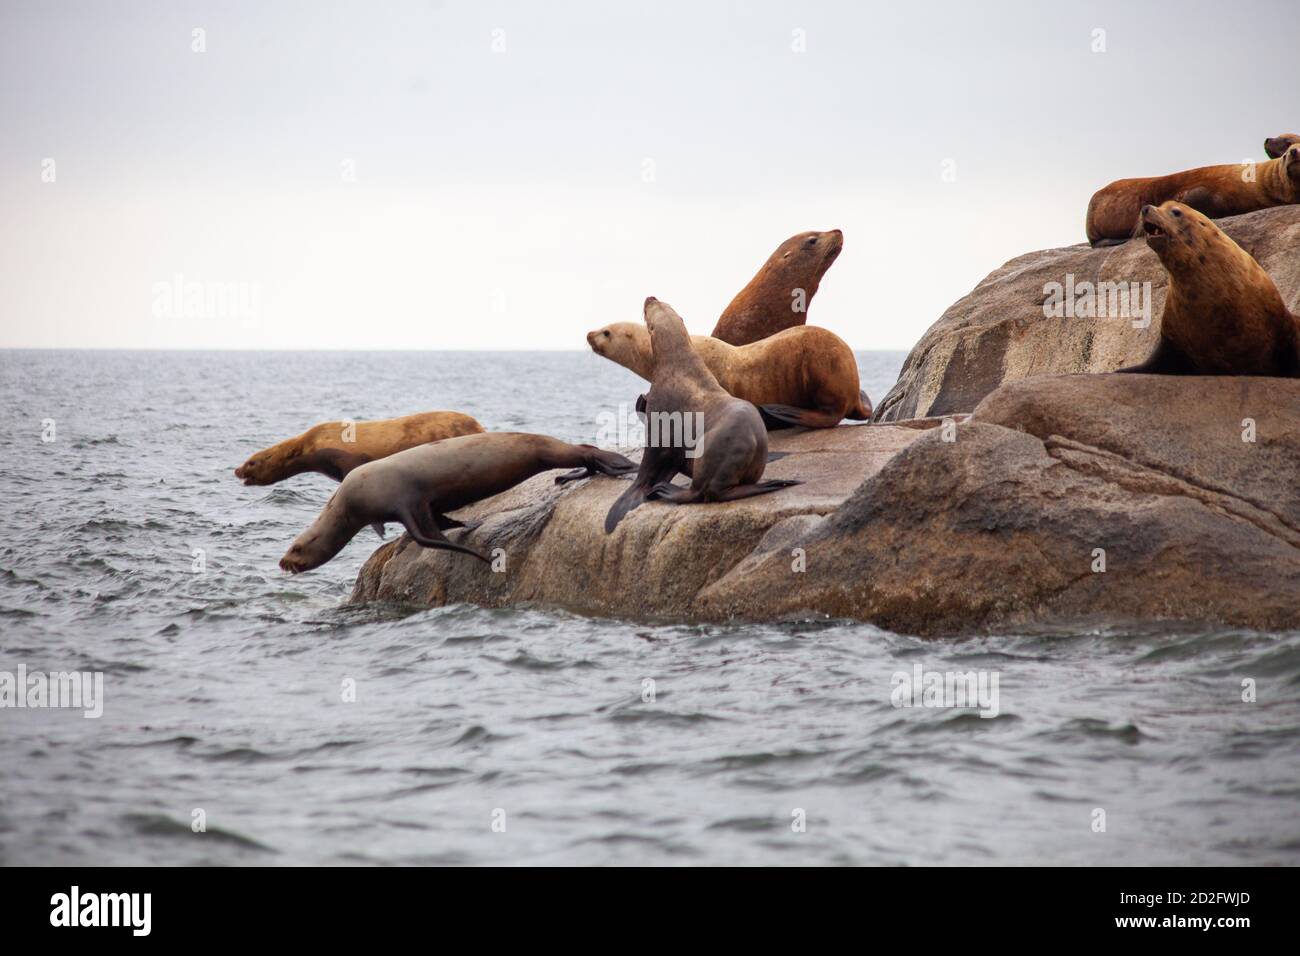 A group of California Sea Lions stand at the water's edge, with two jumping into the water, on the Sunshine Coast in British-Columbia Stock Photo